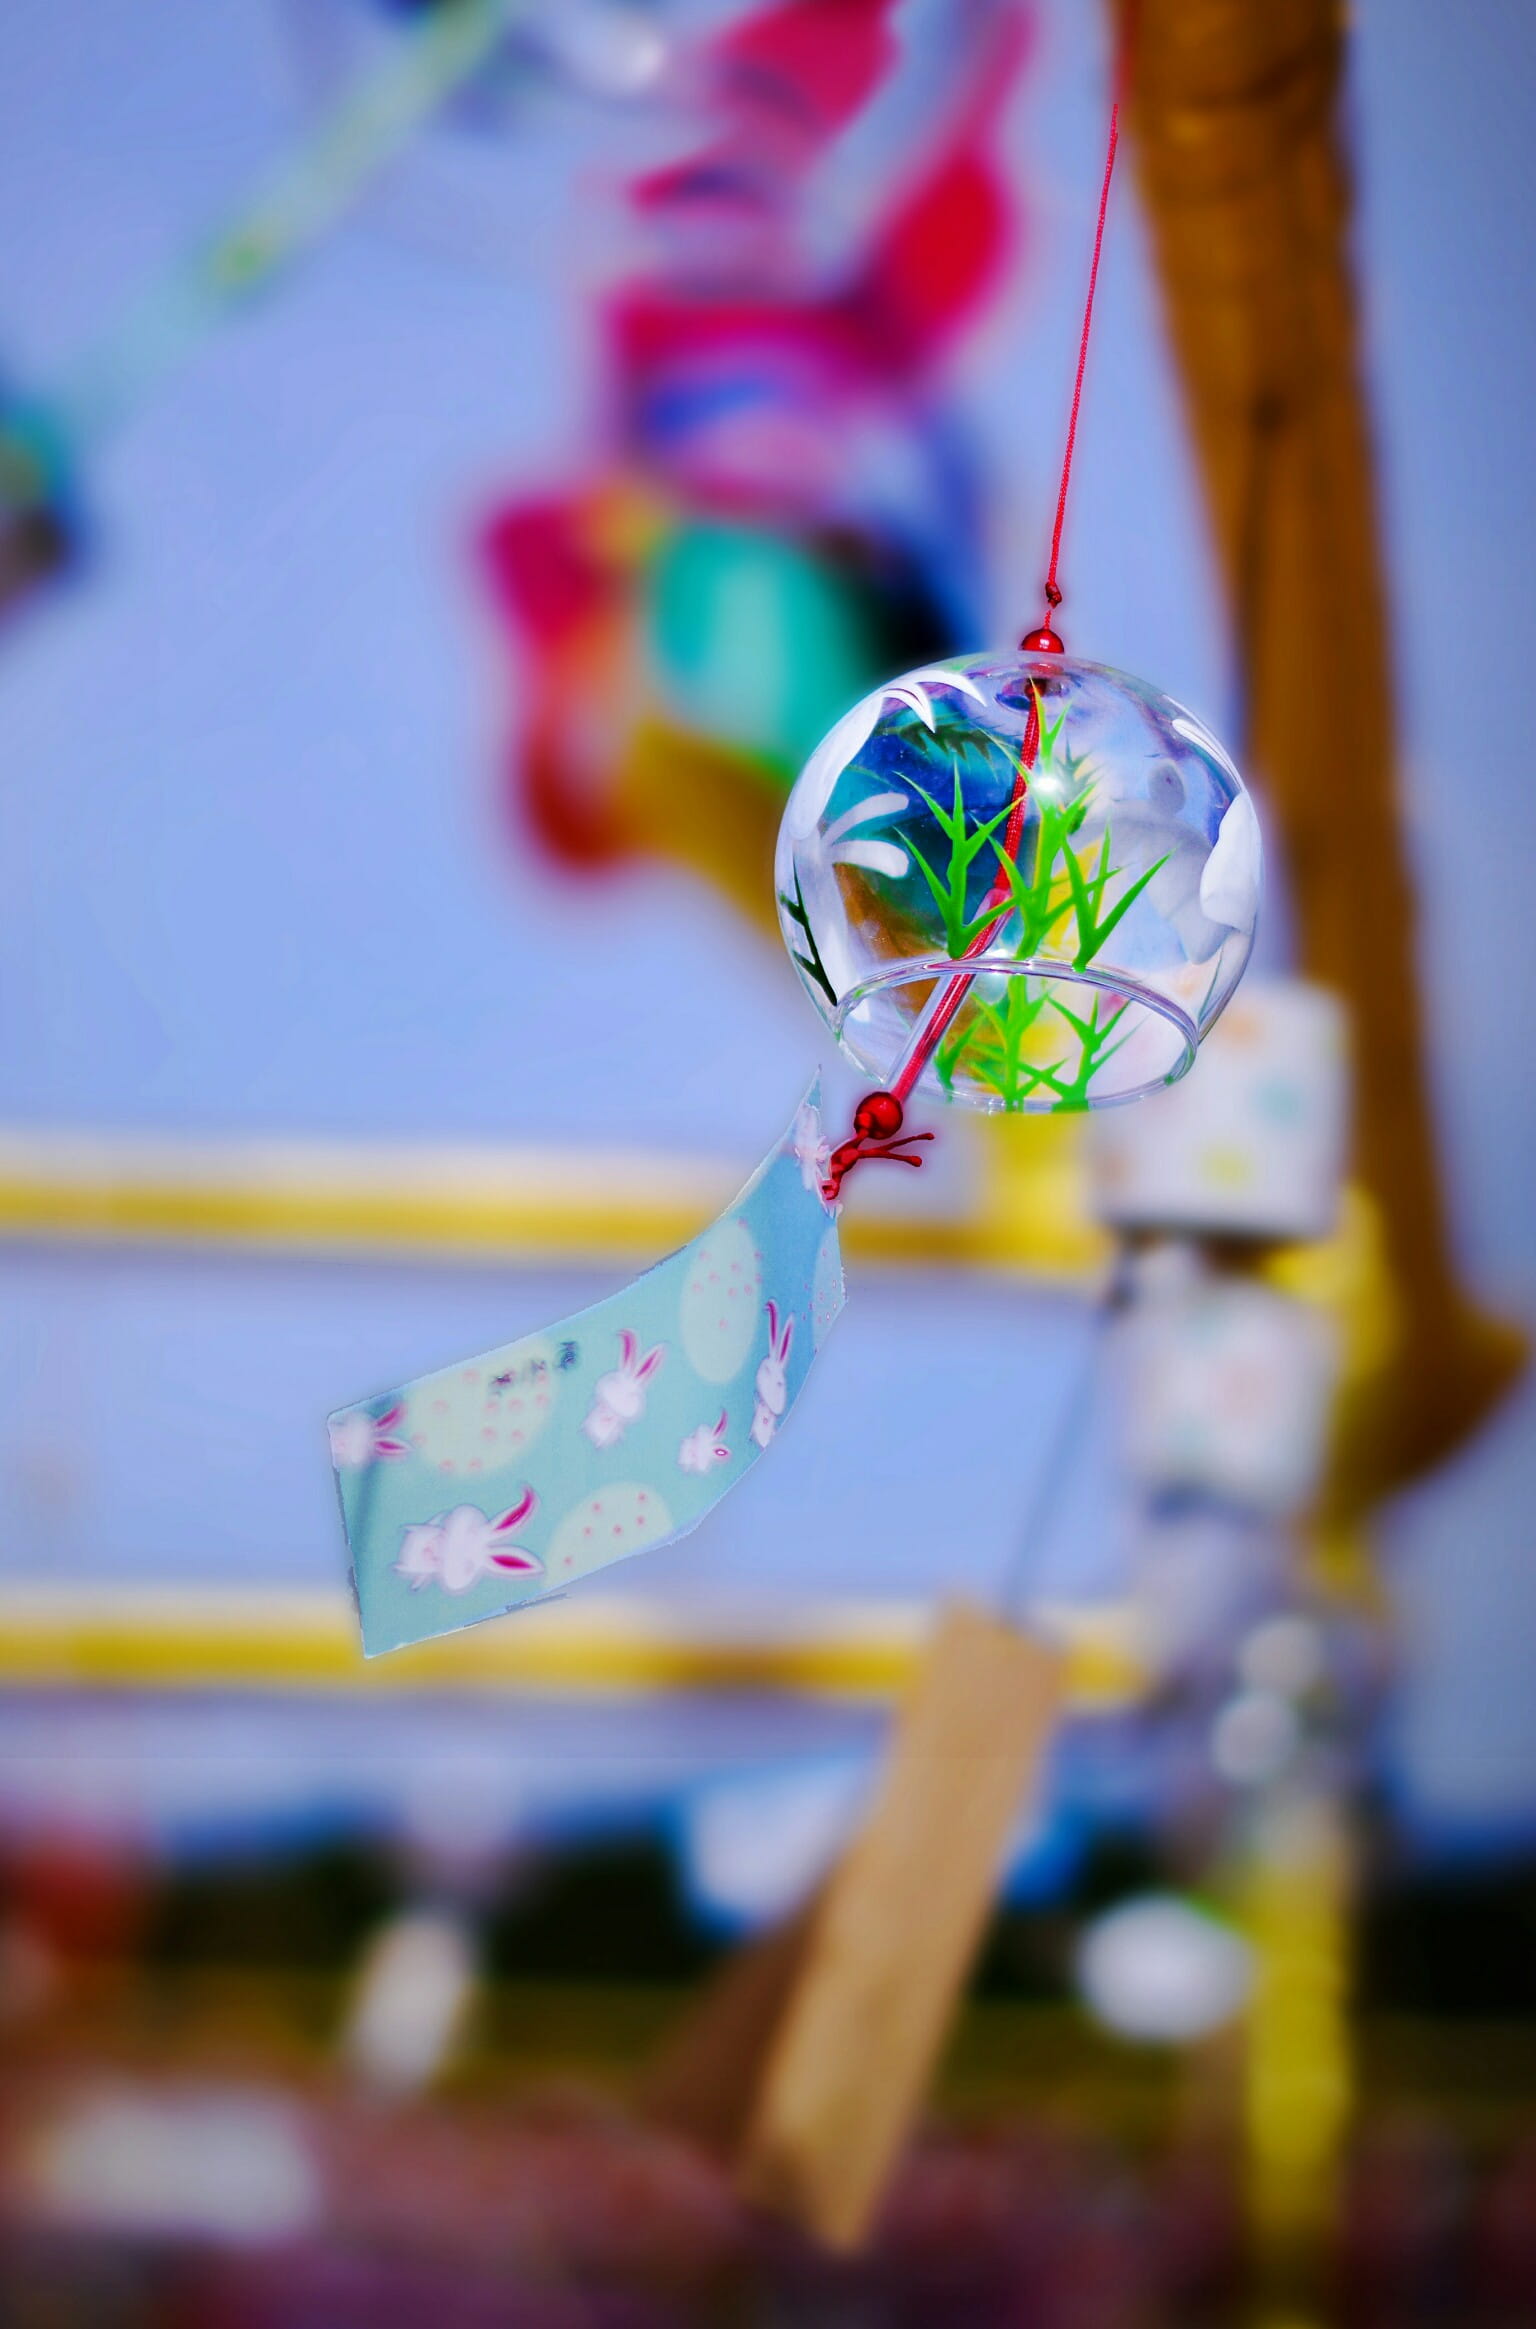 bell, chimes, wind, toy, hanging, close-up, decoration, focus on foreground